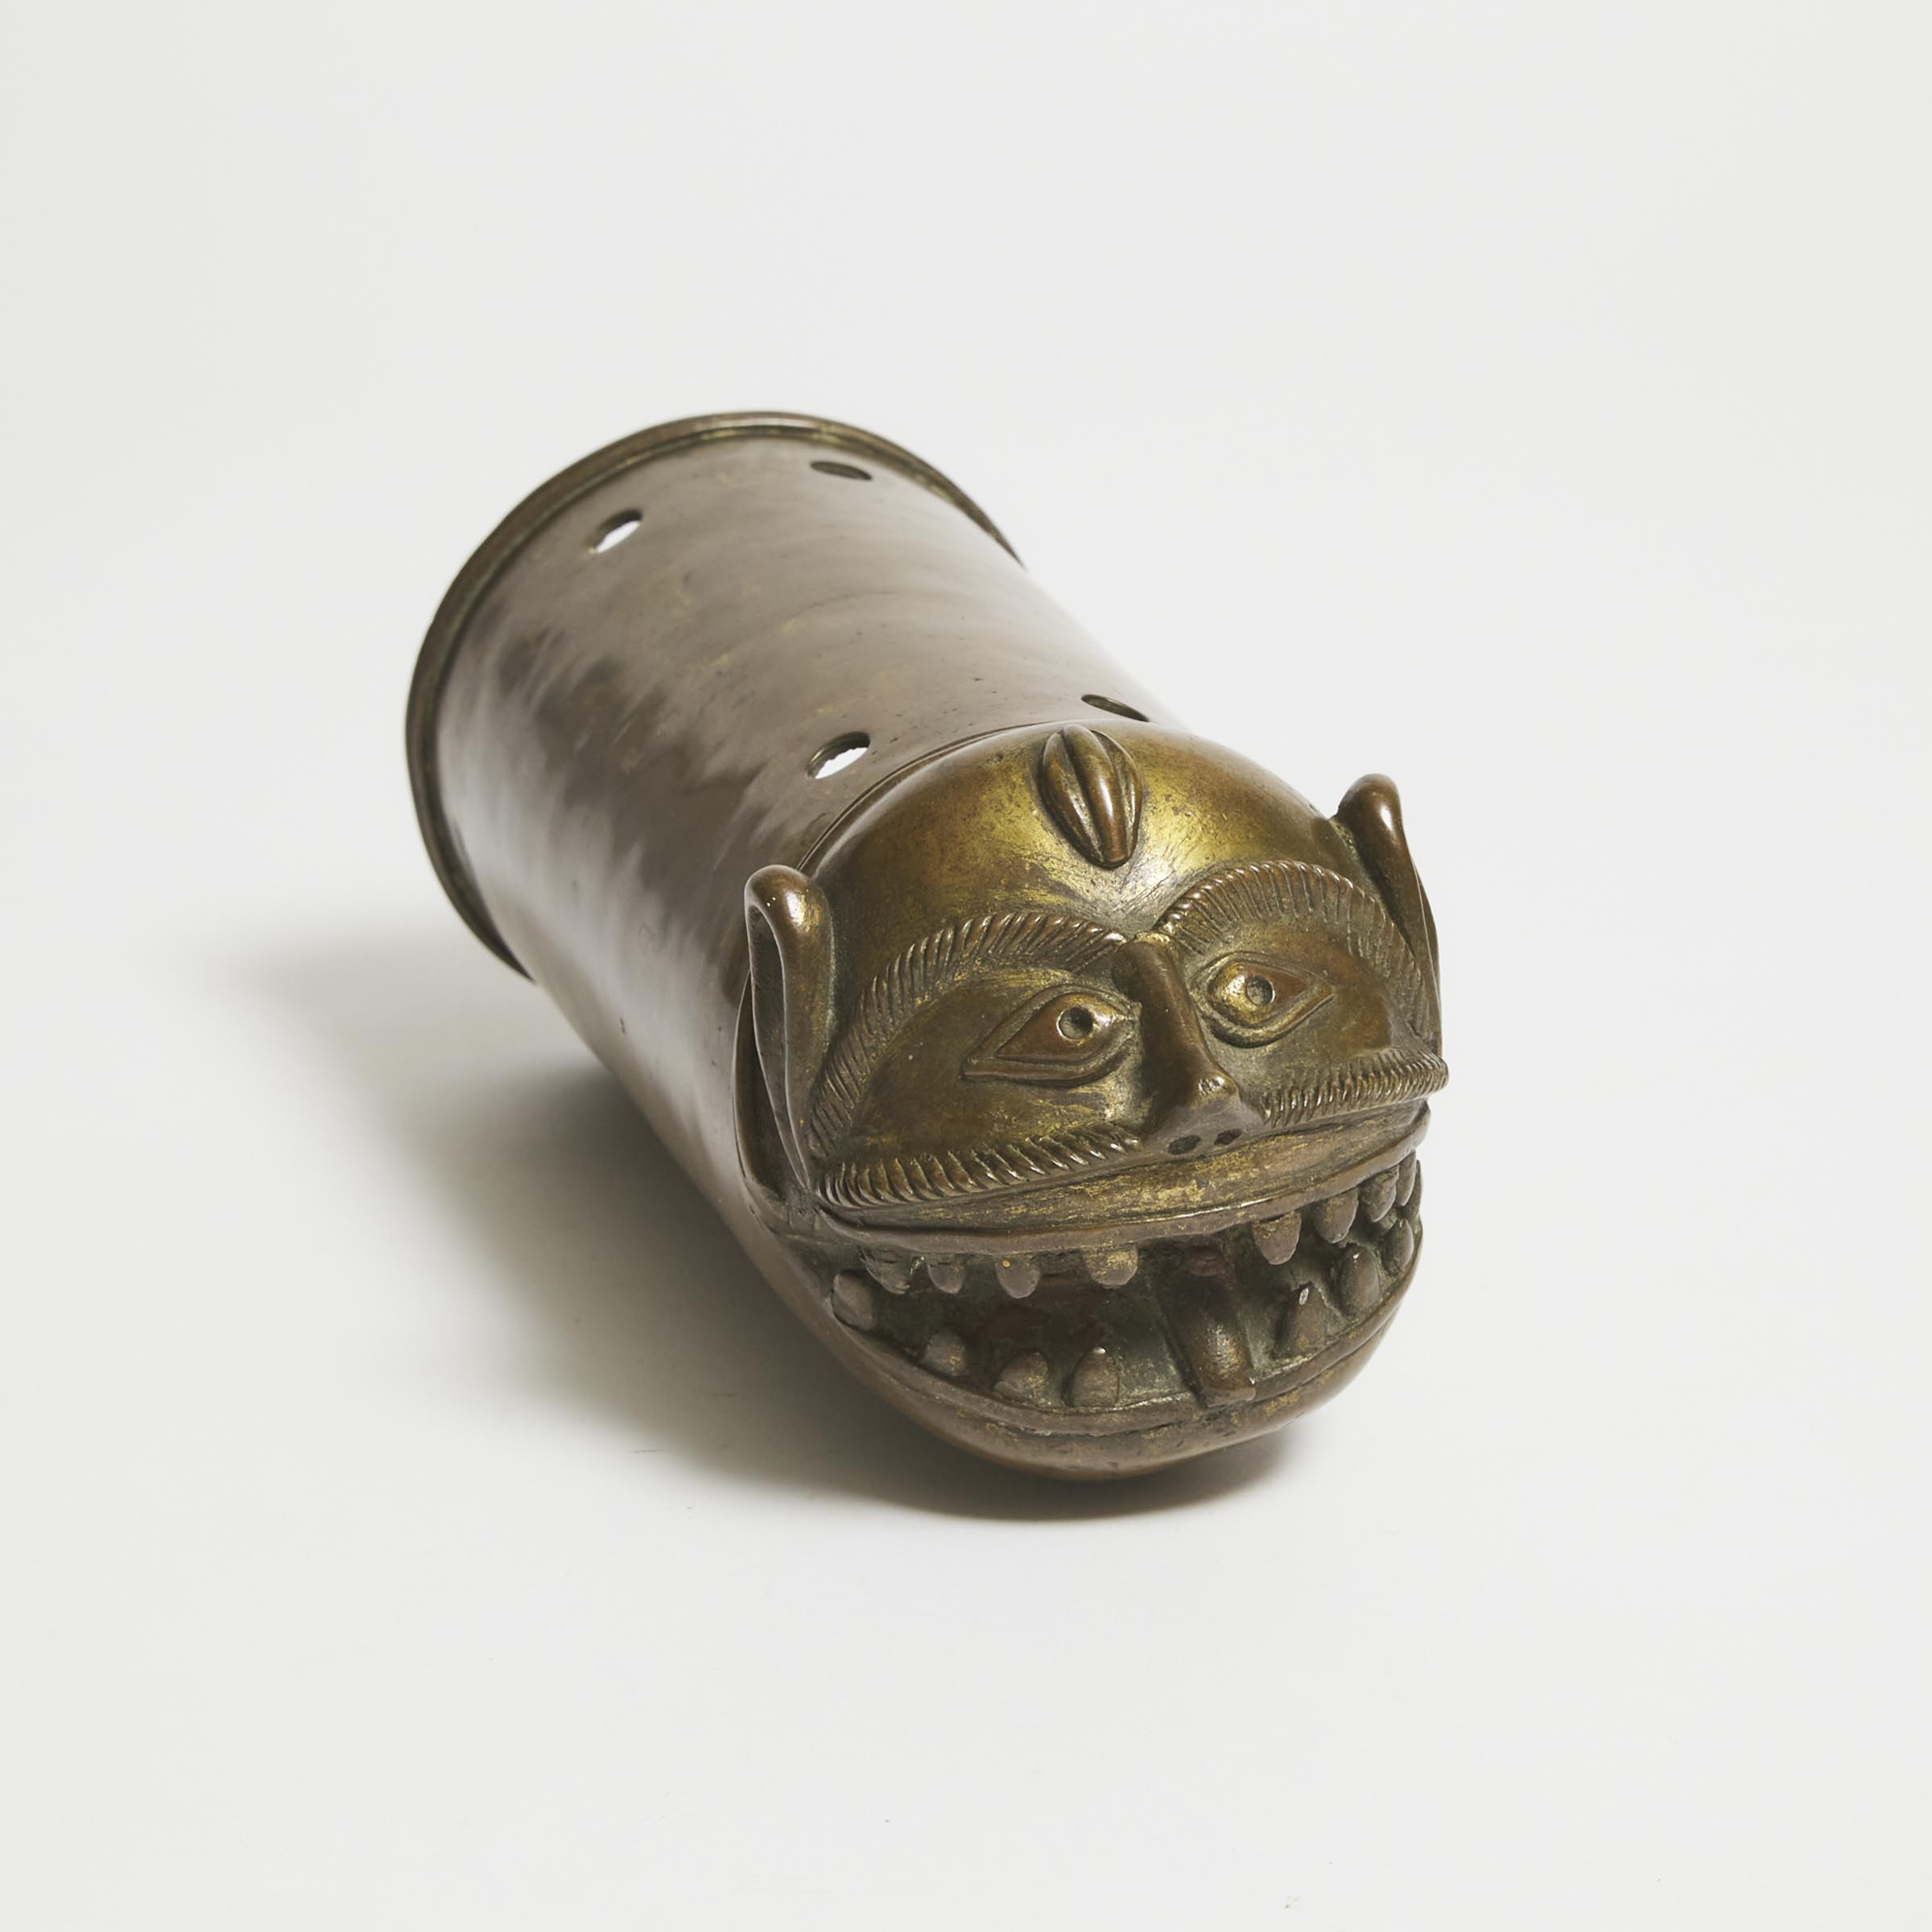 A Gilt Bronze Palanquin Finial in the Form of a Makara Head, India, 18th Century